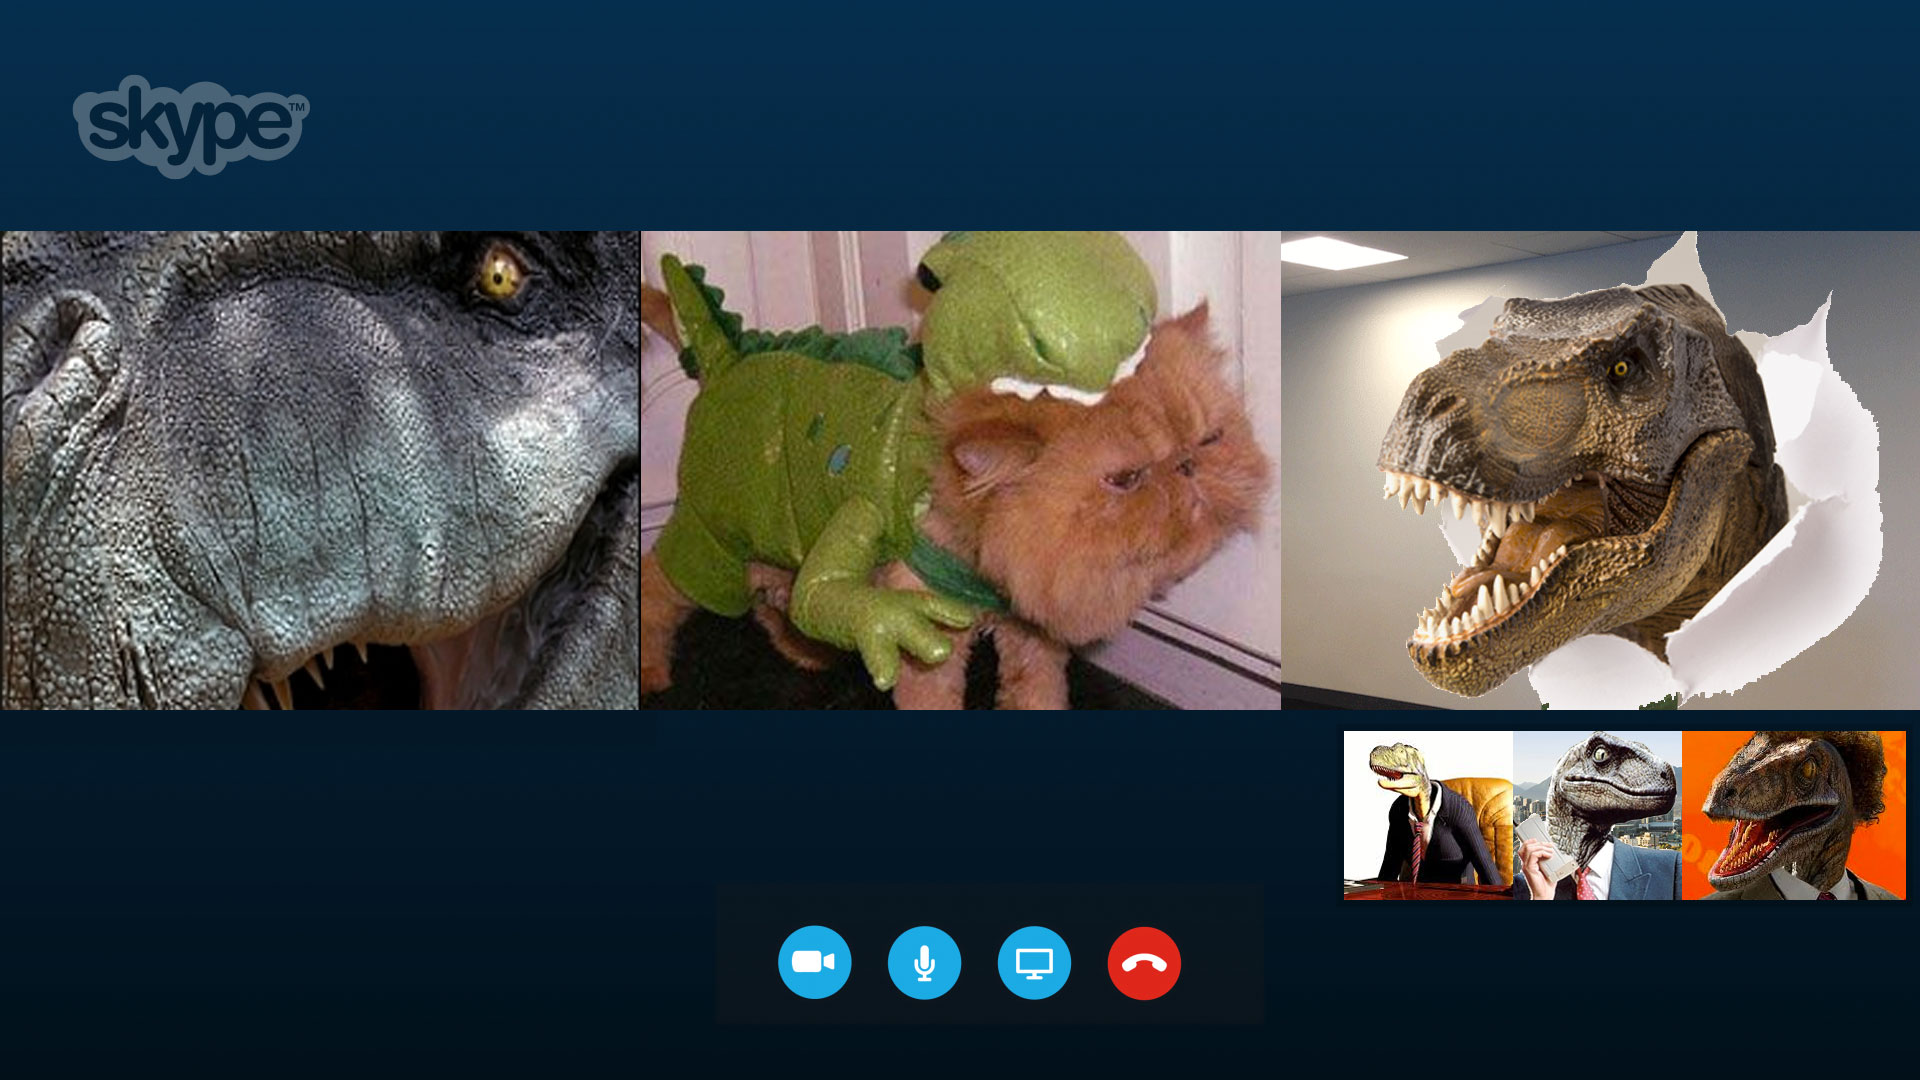 Dinosaurs partaking in a skype group video call.